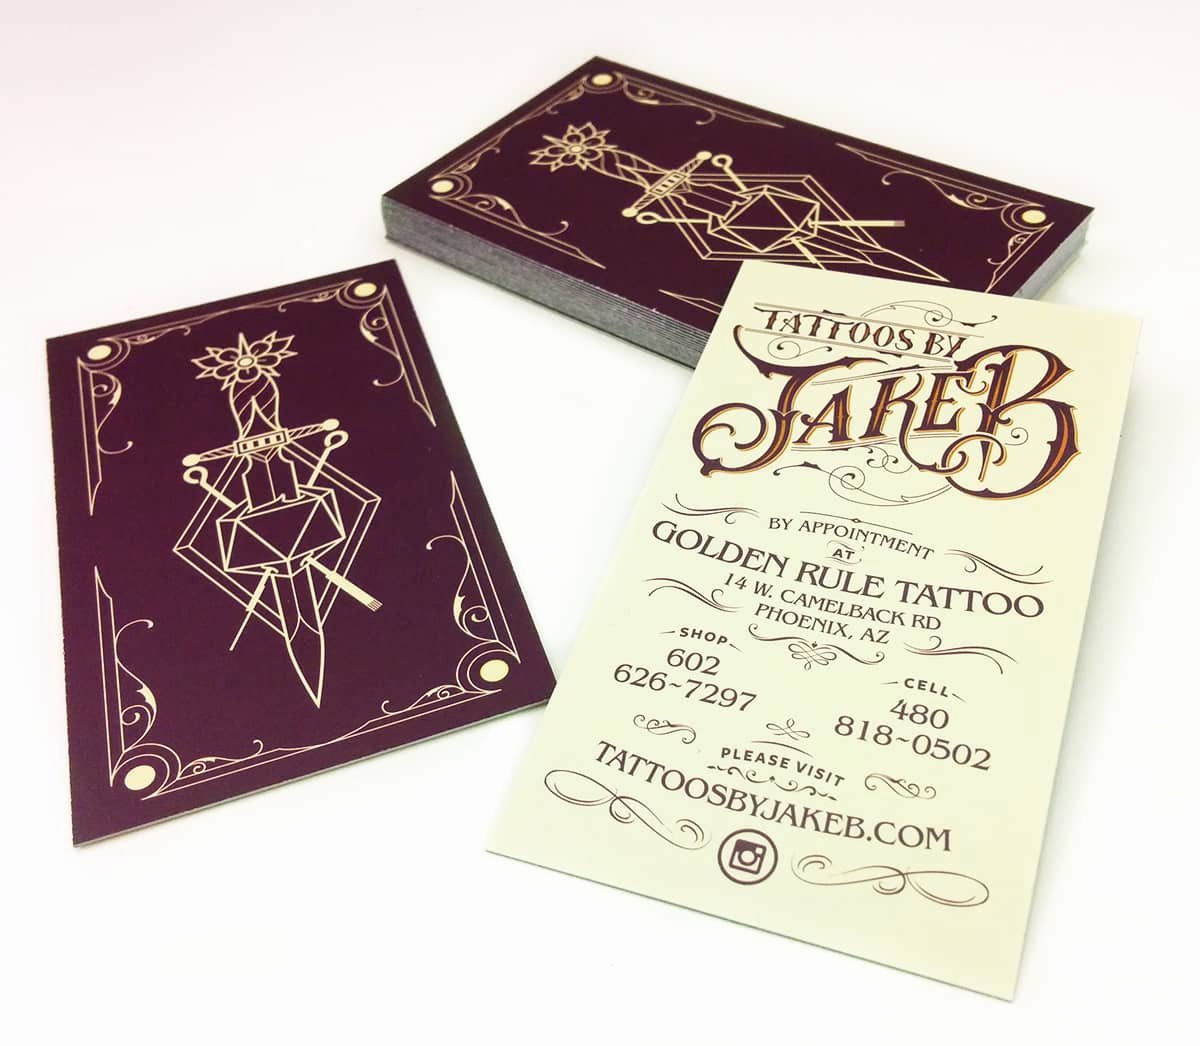 Tattoo Artist Business Cards Awesome Amy Has Design Tattoo Artist Branding &amp; Website Design for Tattoos by Jake B